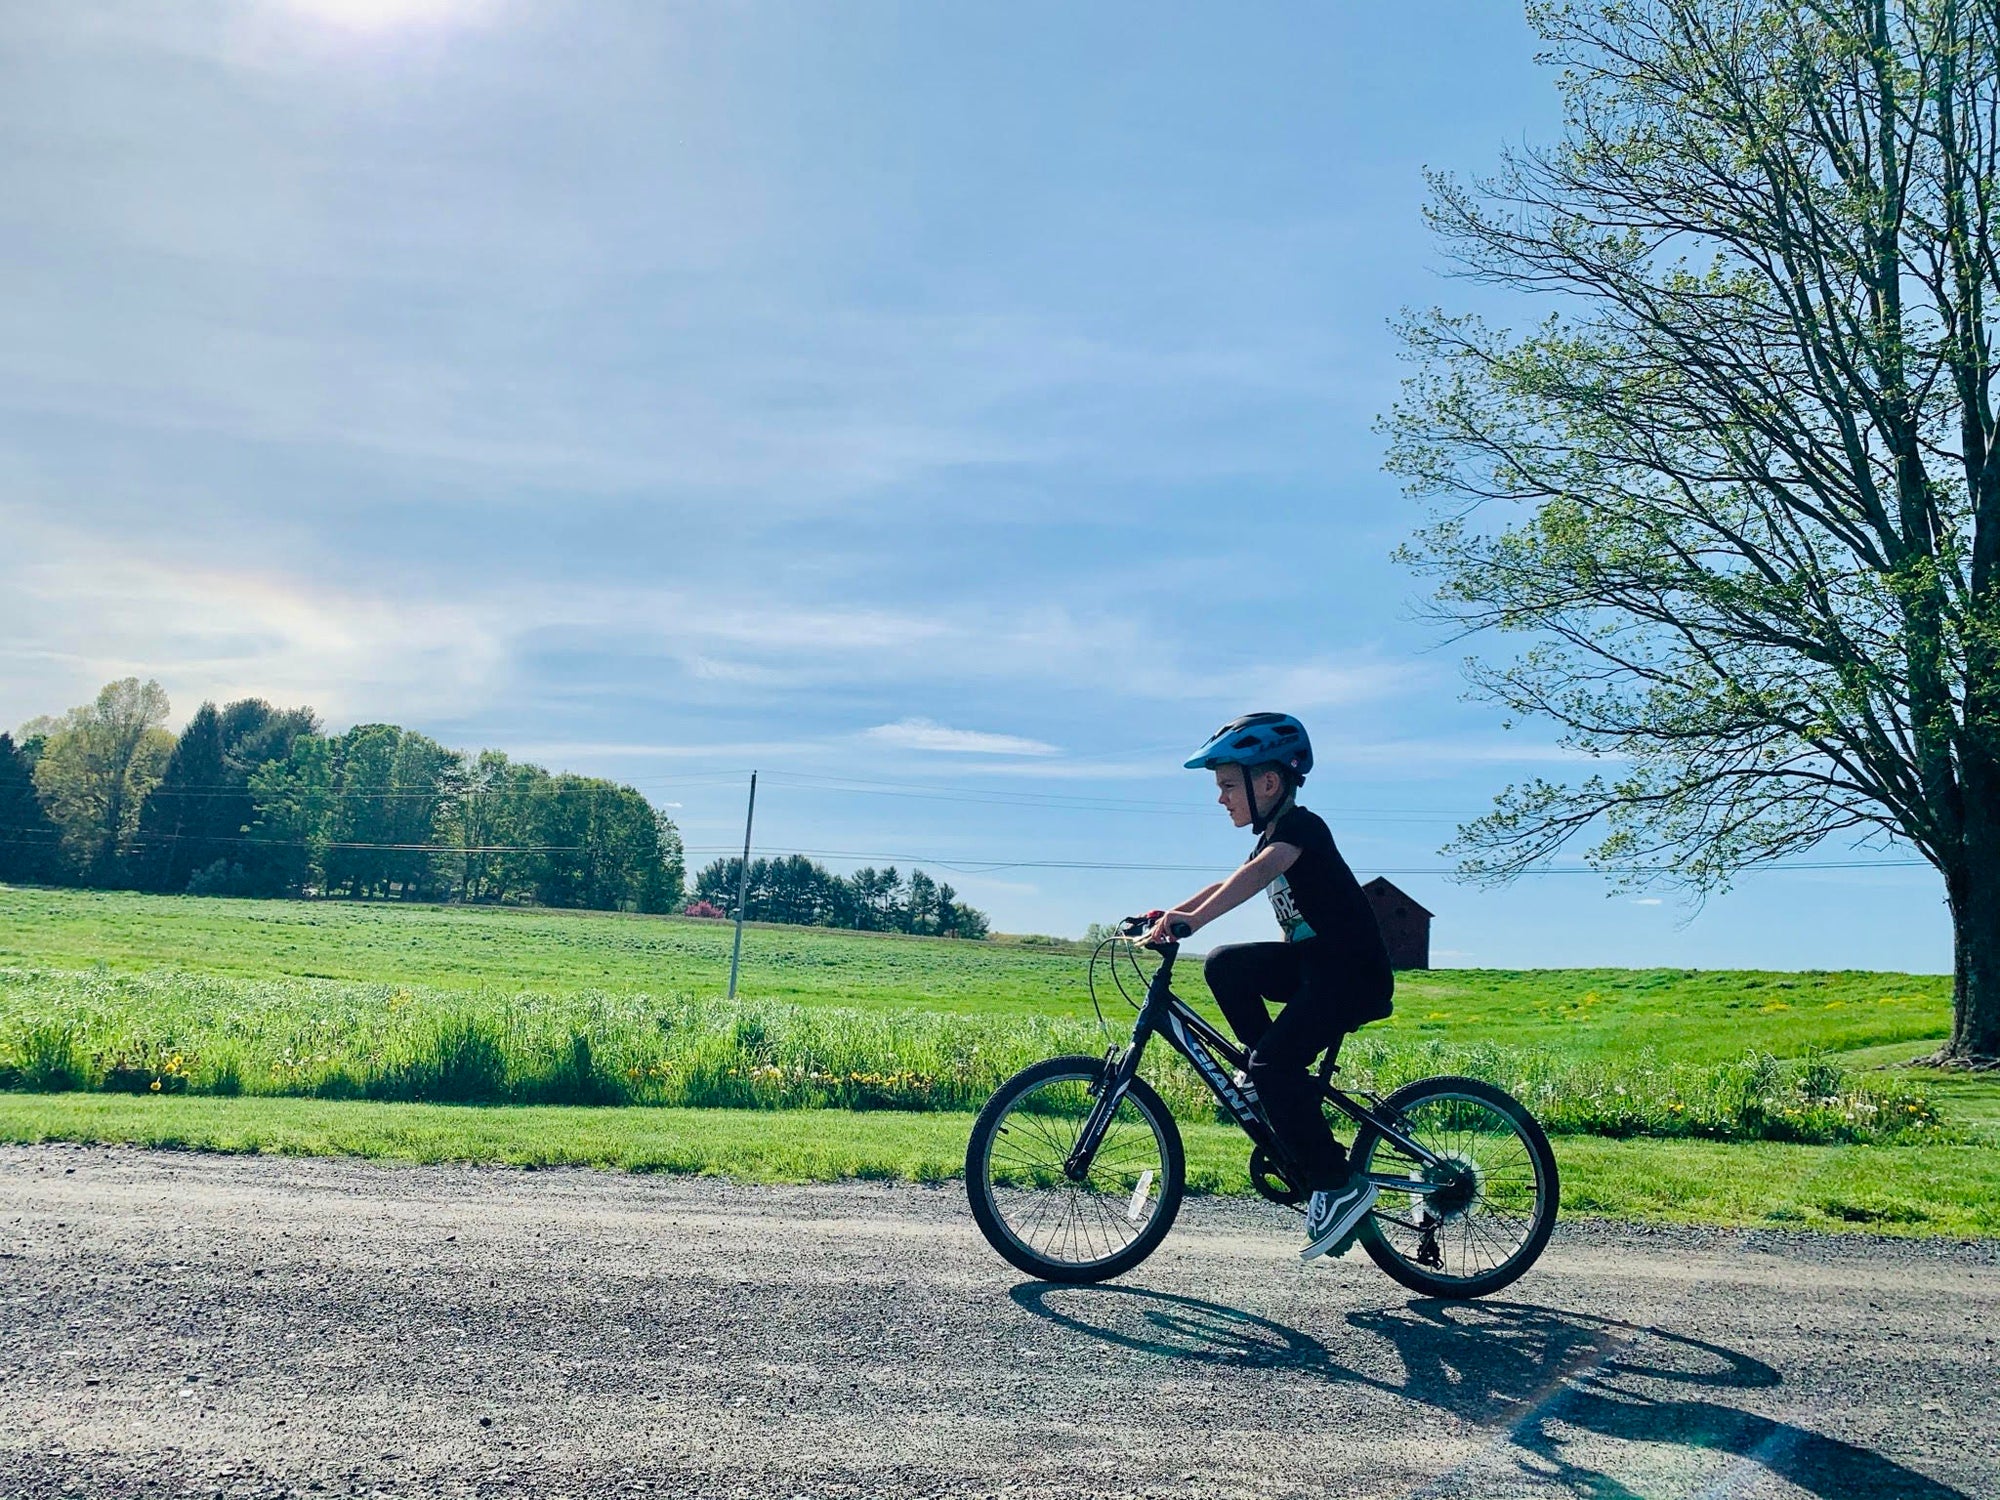 Young kid riding his bike with a Lazer kids helmet on a sunny day while riding his bicycle